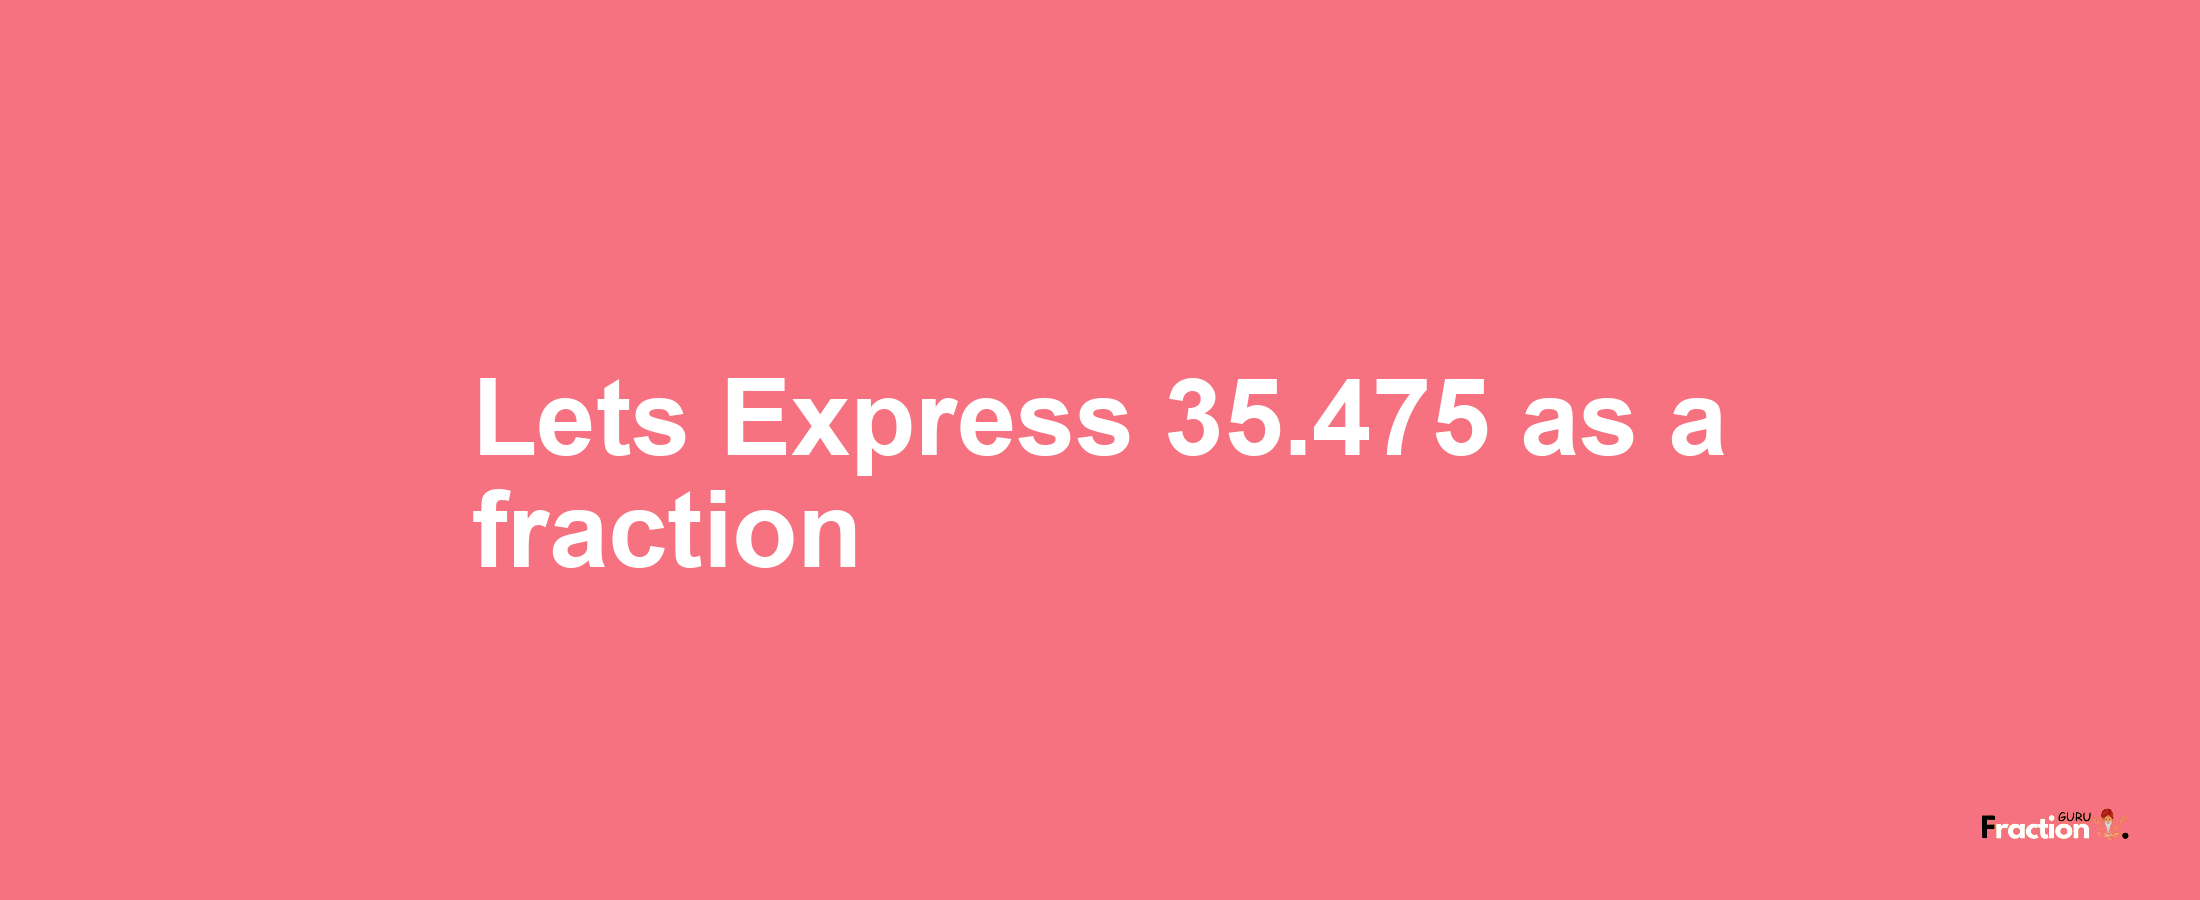 Lets Express 35.475 as afraction